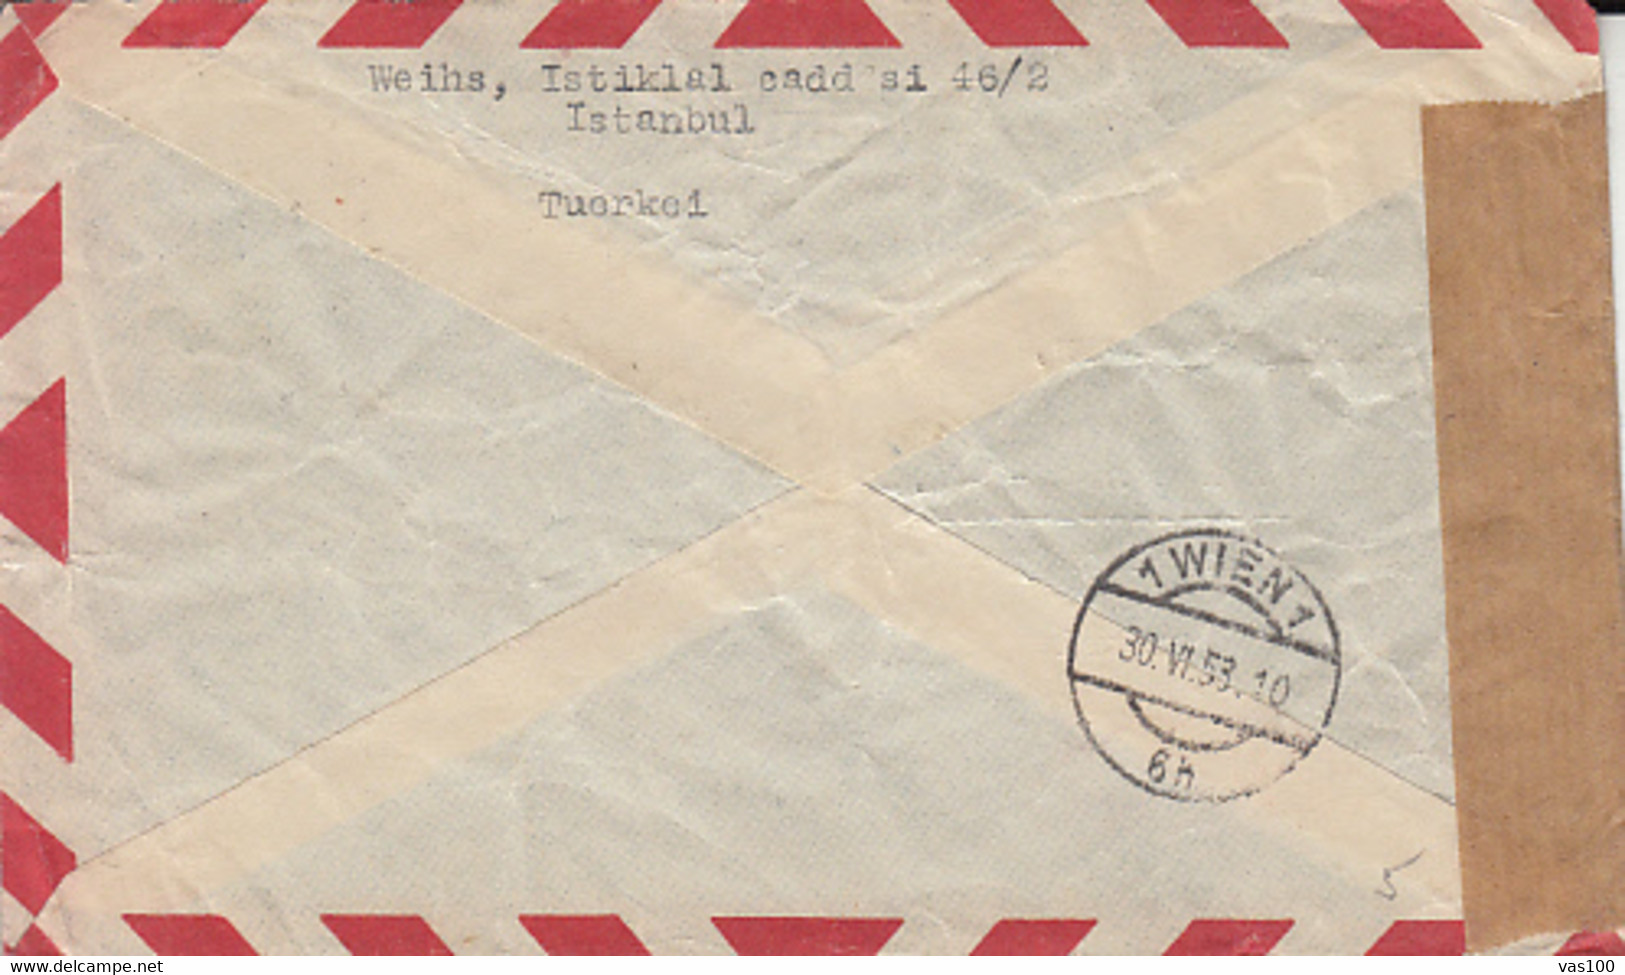 ISTANBUL STREET VIEW, STAMP ON CENSORED NR 184 COVER, 1953, TURKEY - Lettres & Documents